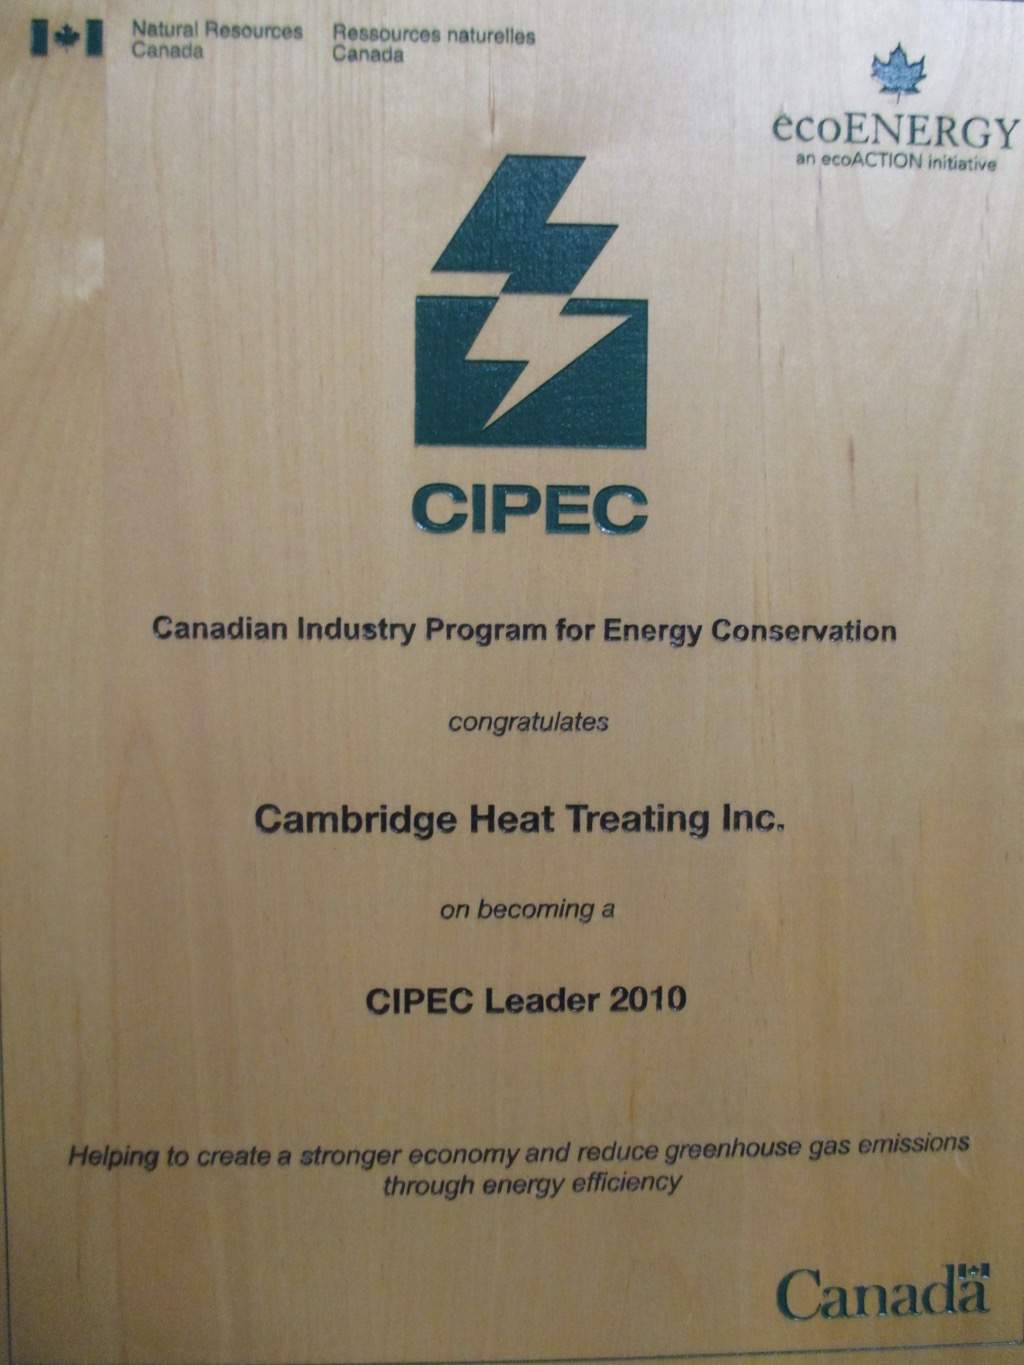 Canadian Industry Program for Energy Conservation Award